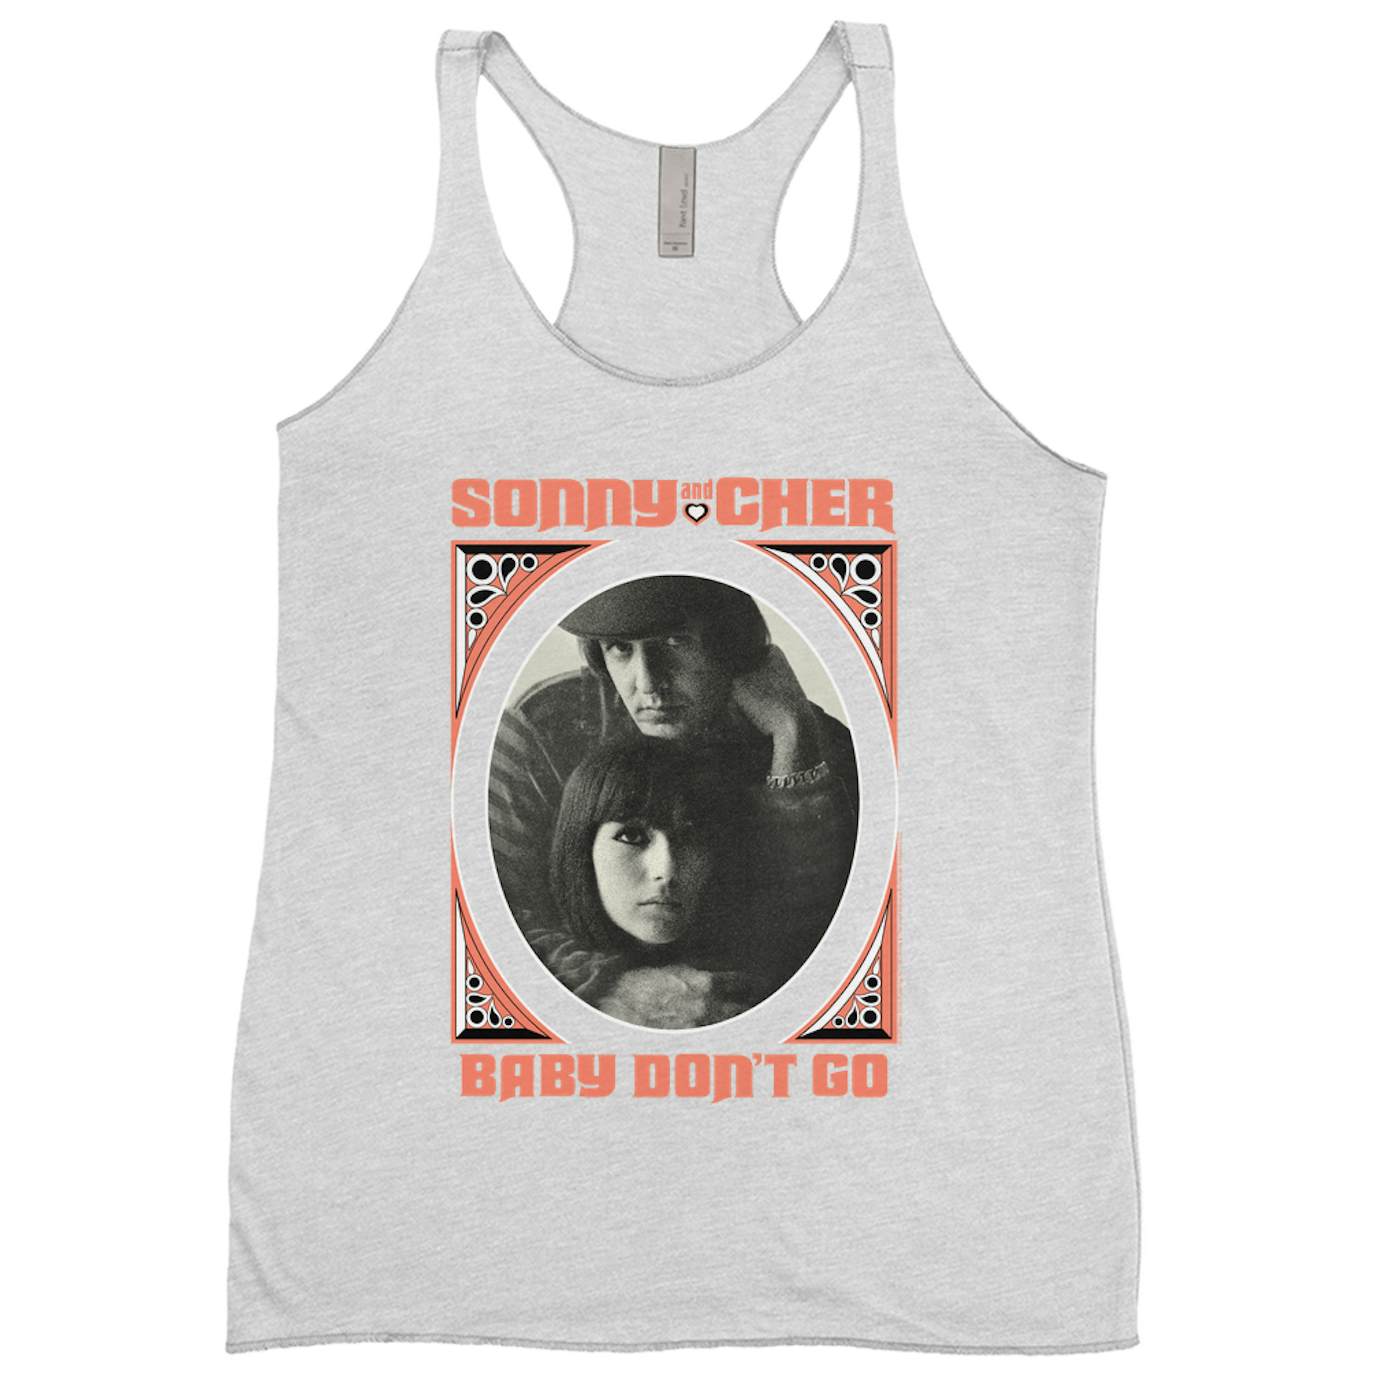 Sonny & Cher Ladies' Tank Top | Baby Don't Go Retro Frame Image Sonny and Cher Shirt (Merchbar Exclusive)